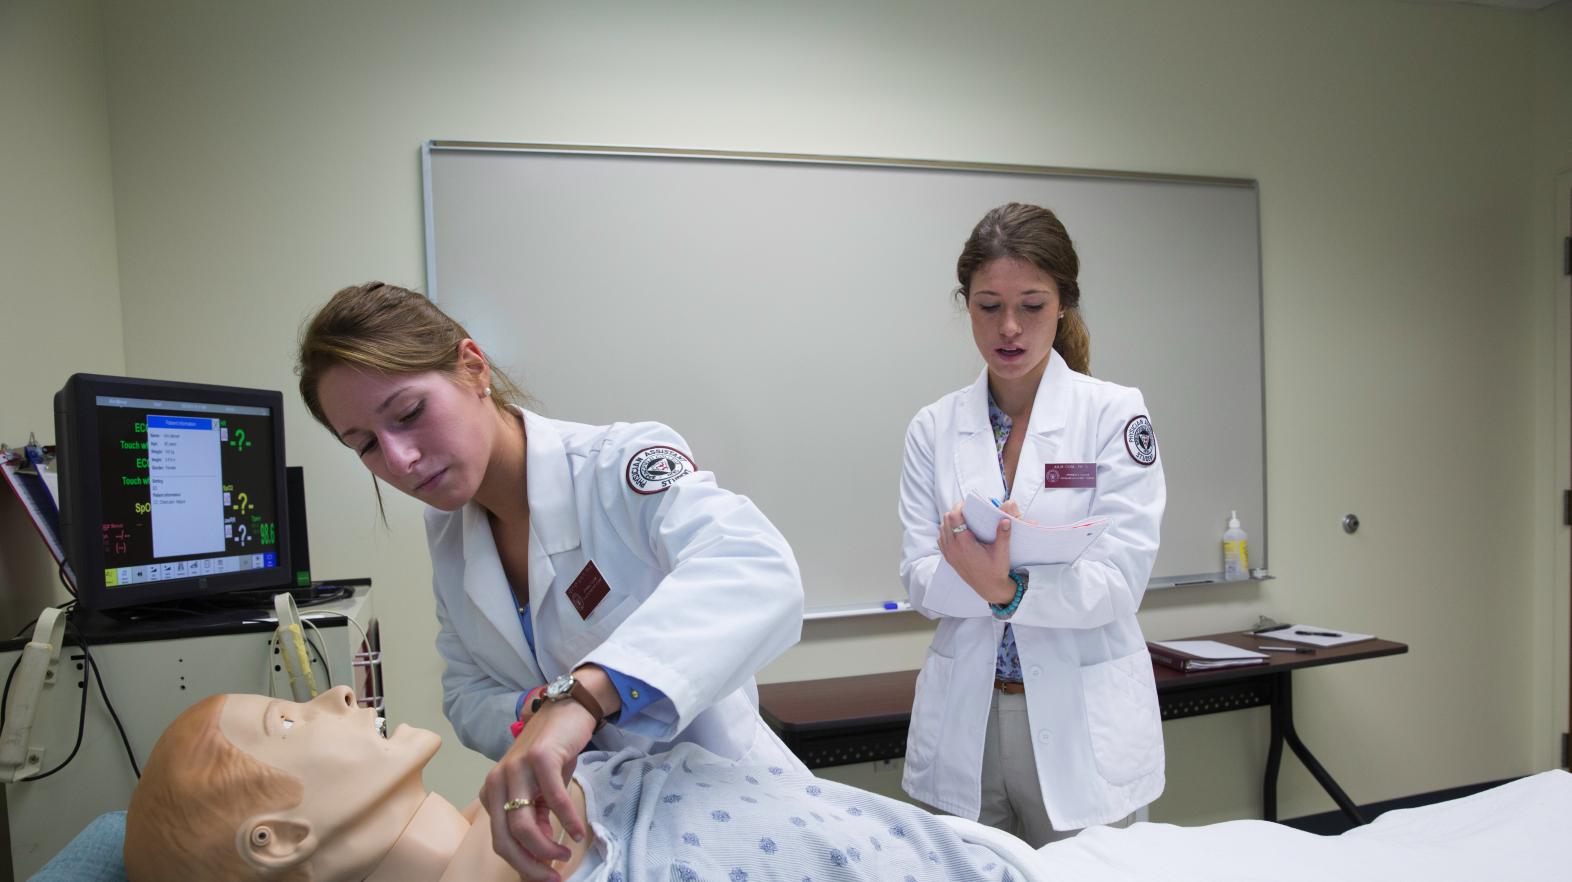 Physician assistant students work in the sim lab